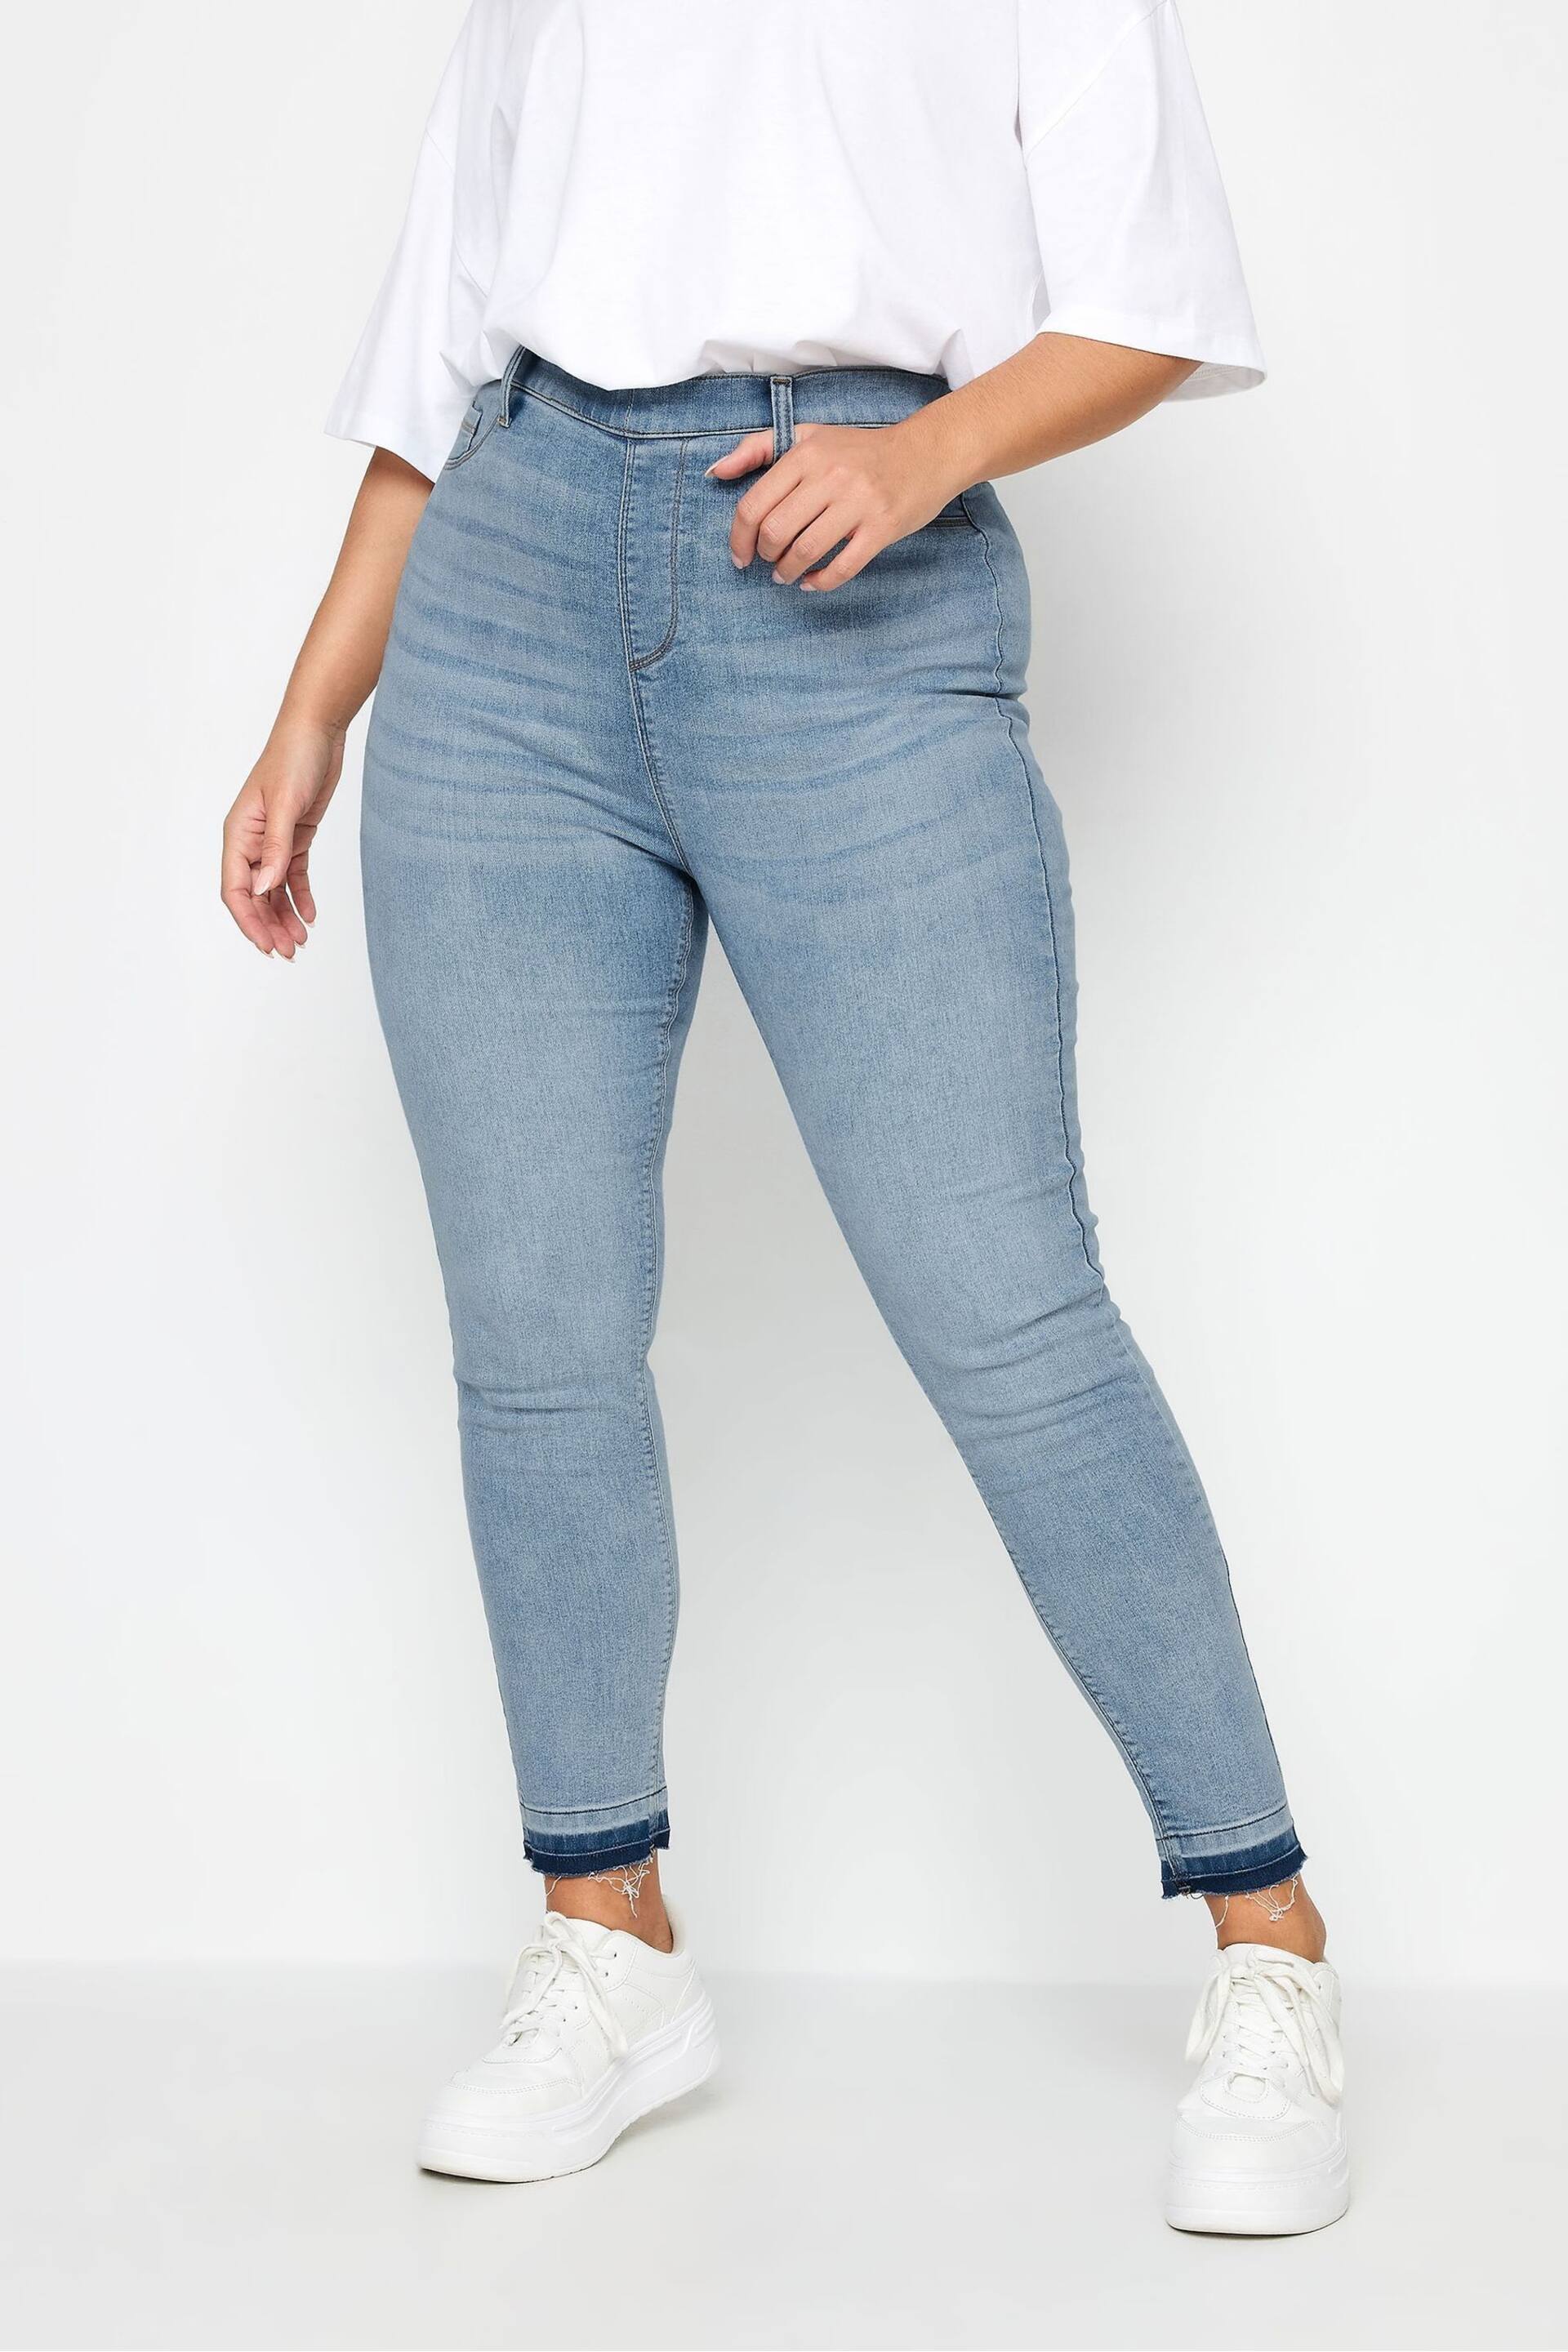 Yours Curve Light Blue Turn Up GRACE Jeans - Image 1 of 4